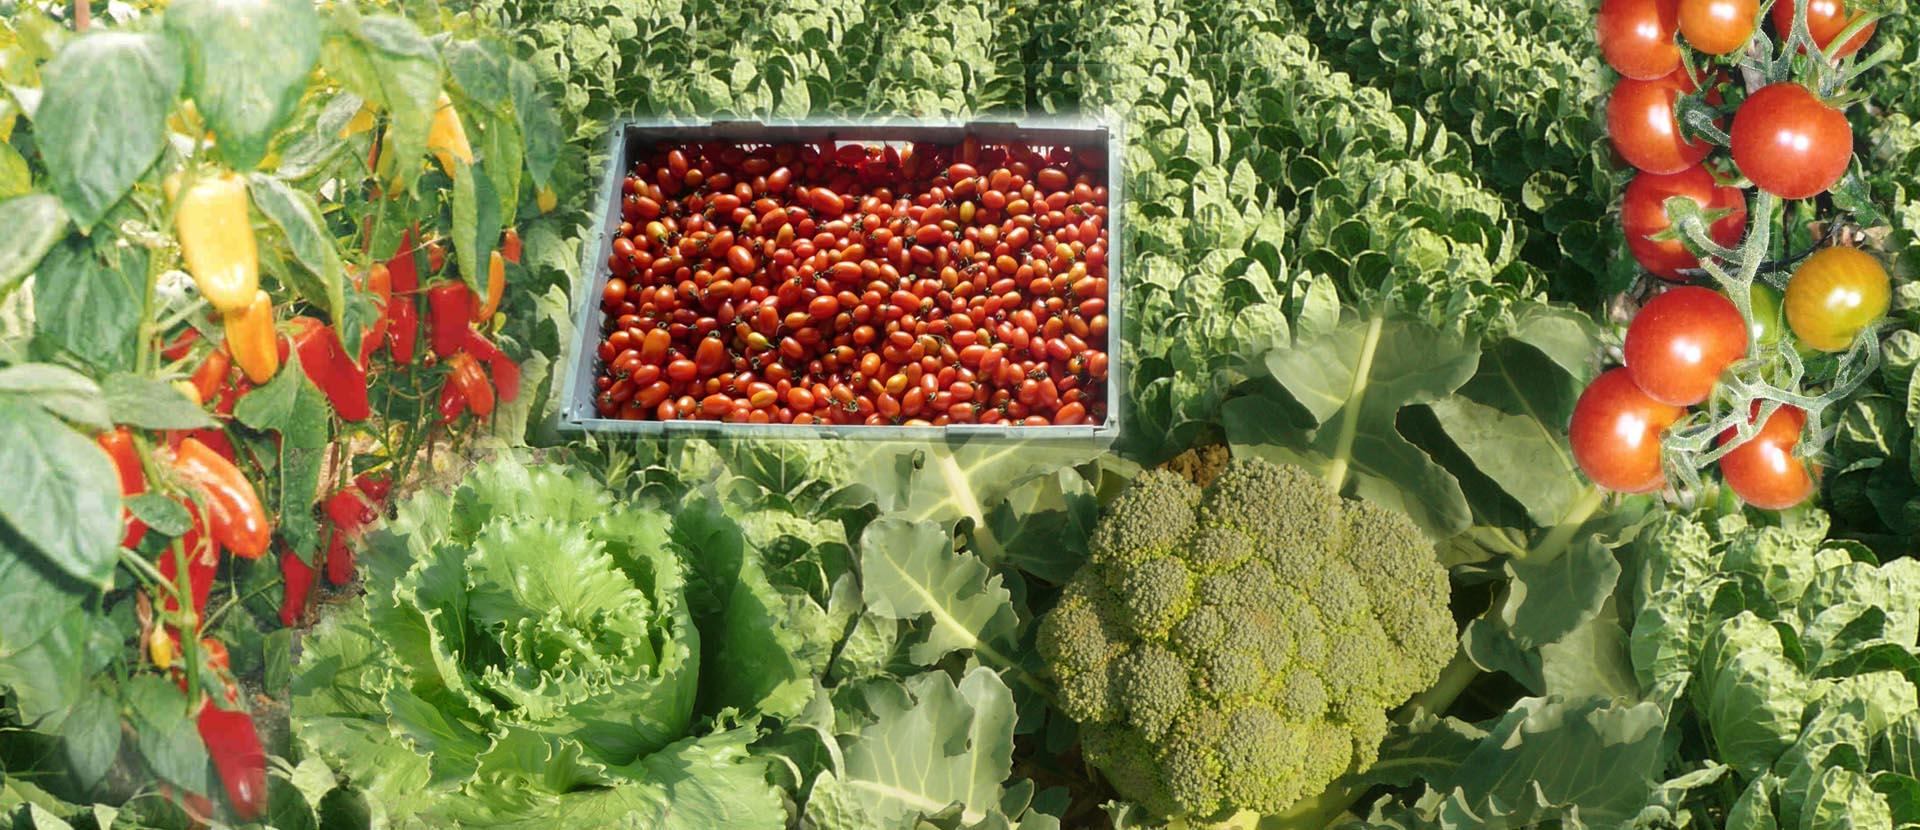 Cultivation of Vegetables Commercially